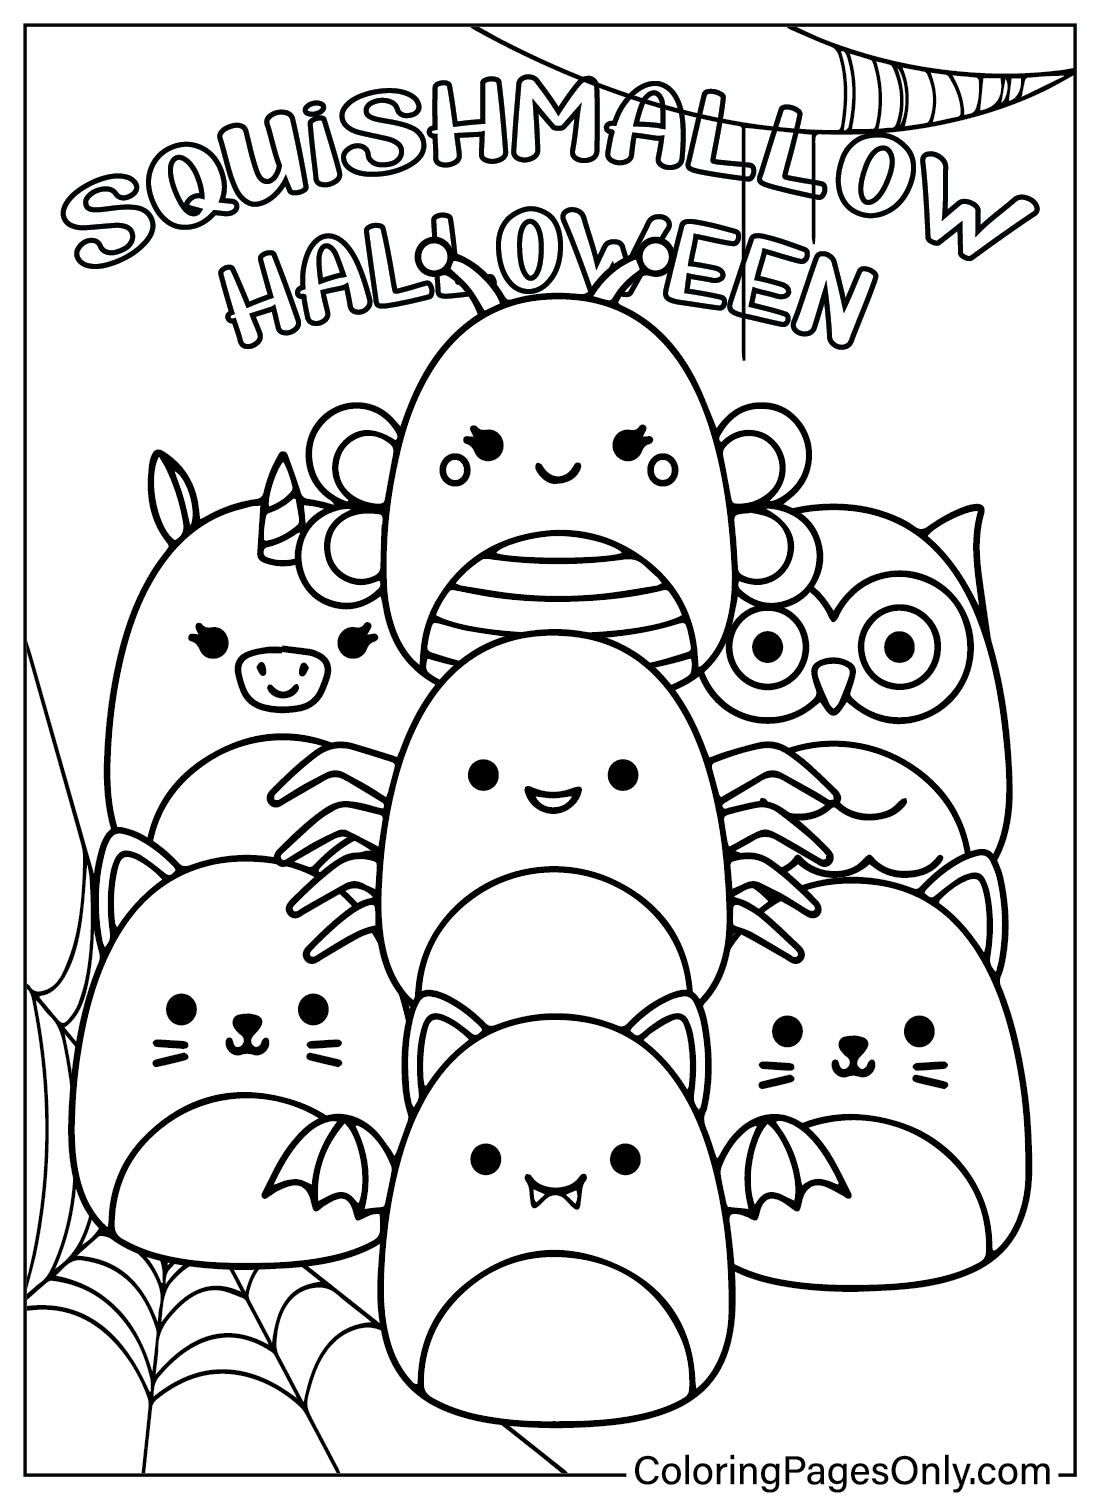 Squishmallow Coloring Pages Halloween from Squishmallow Halloween